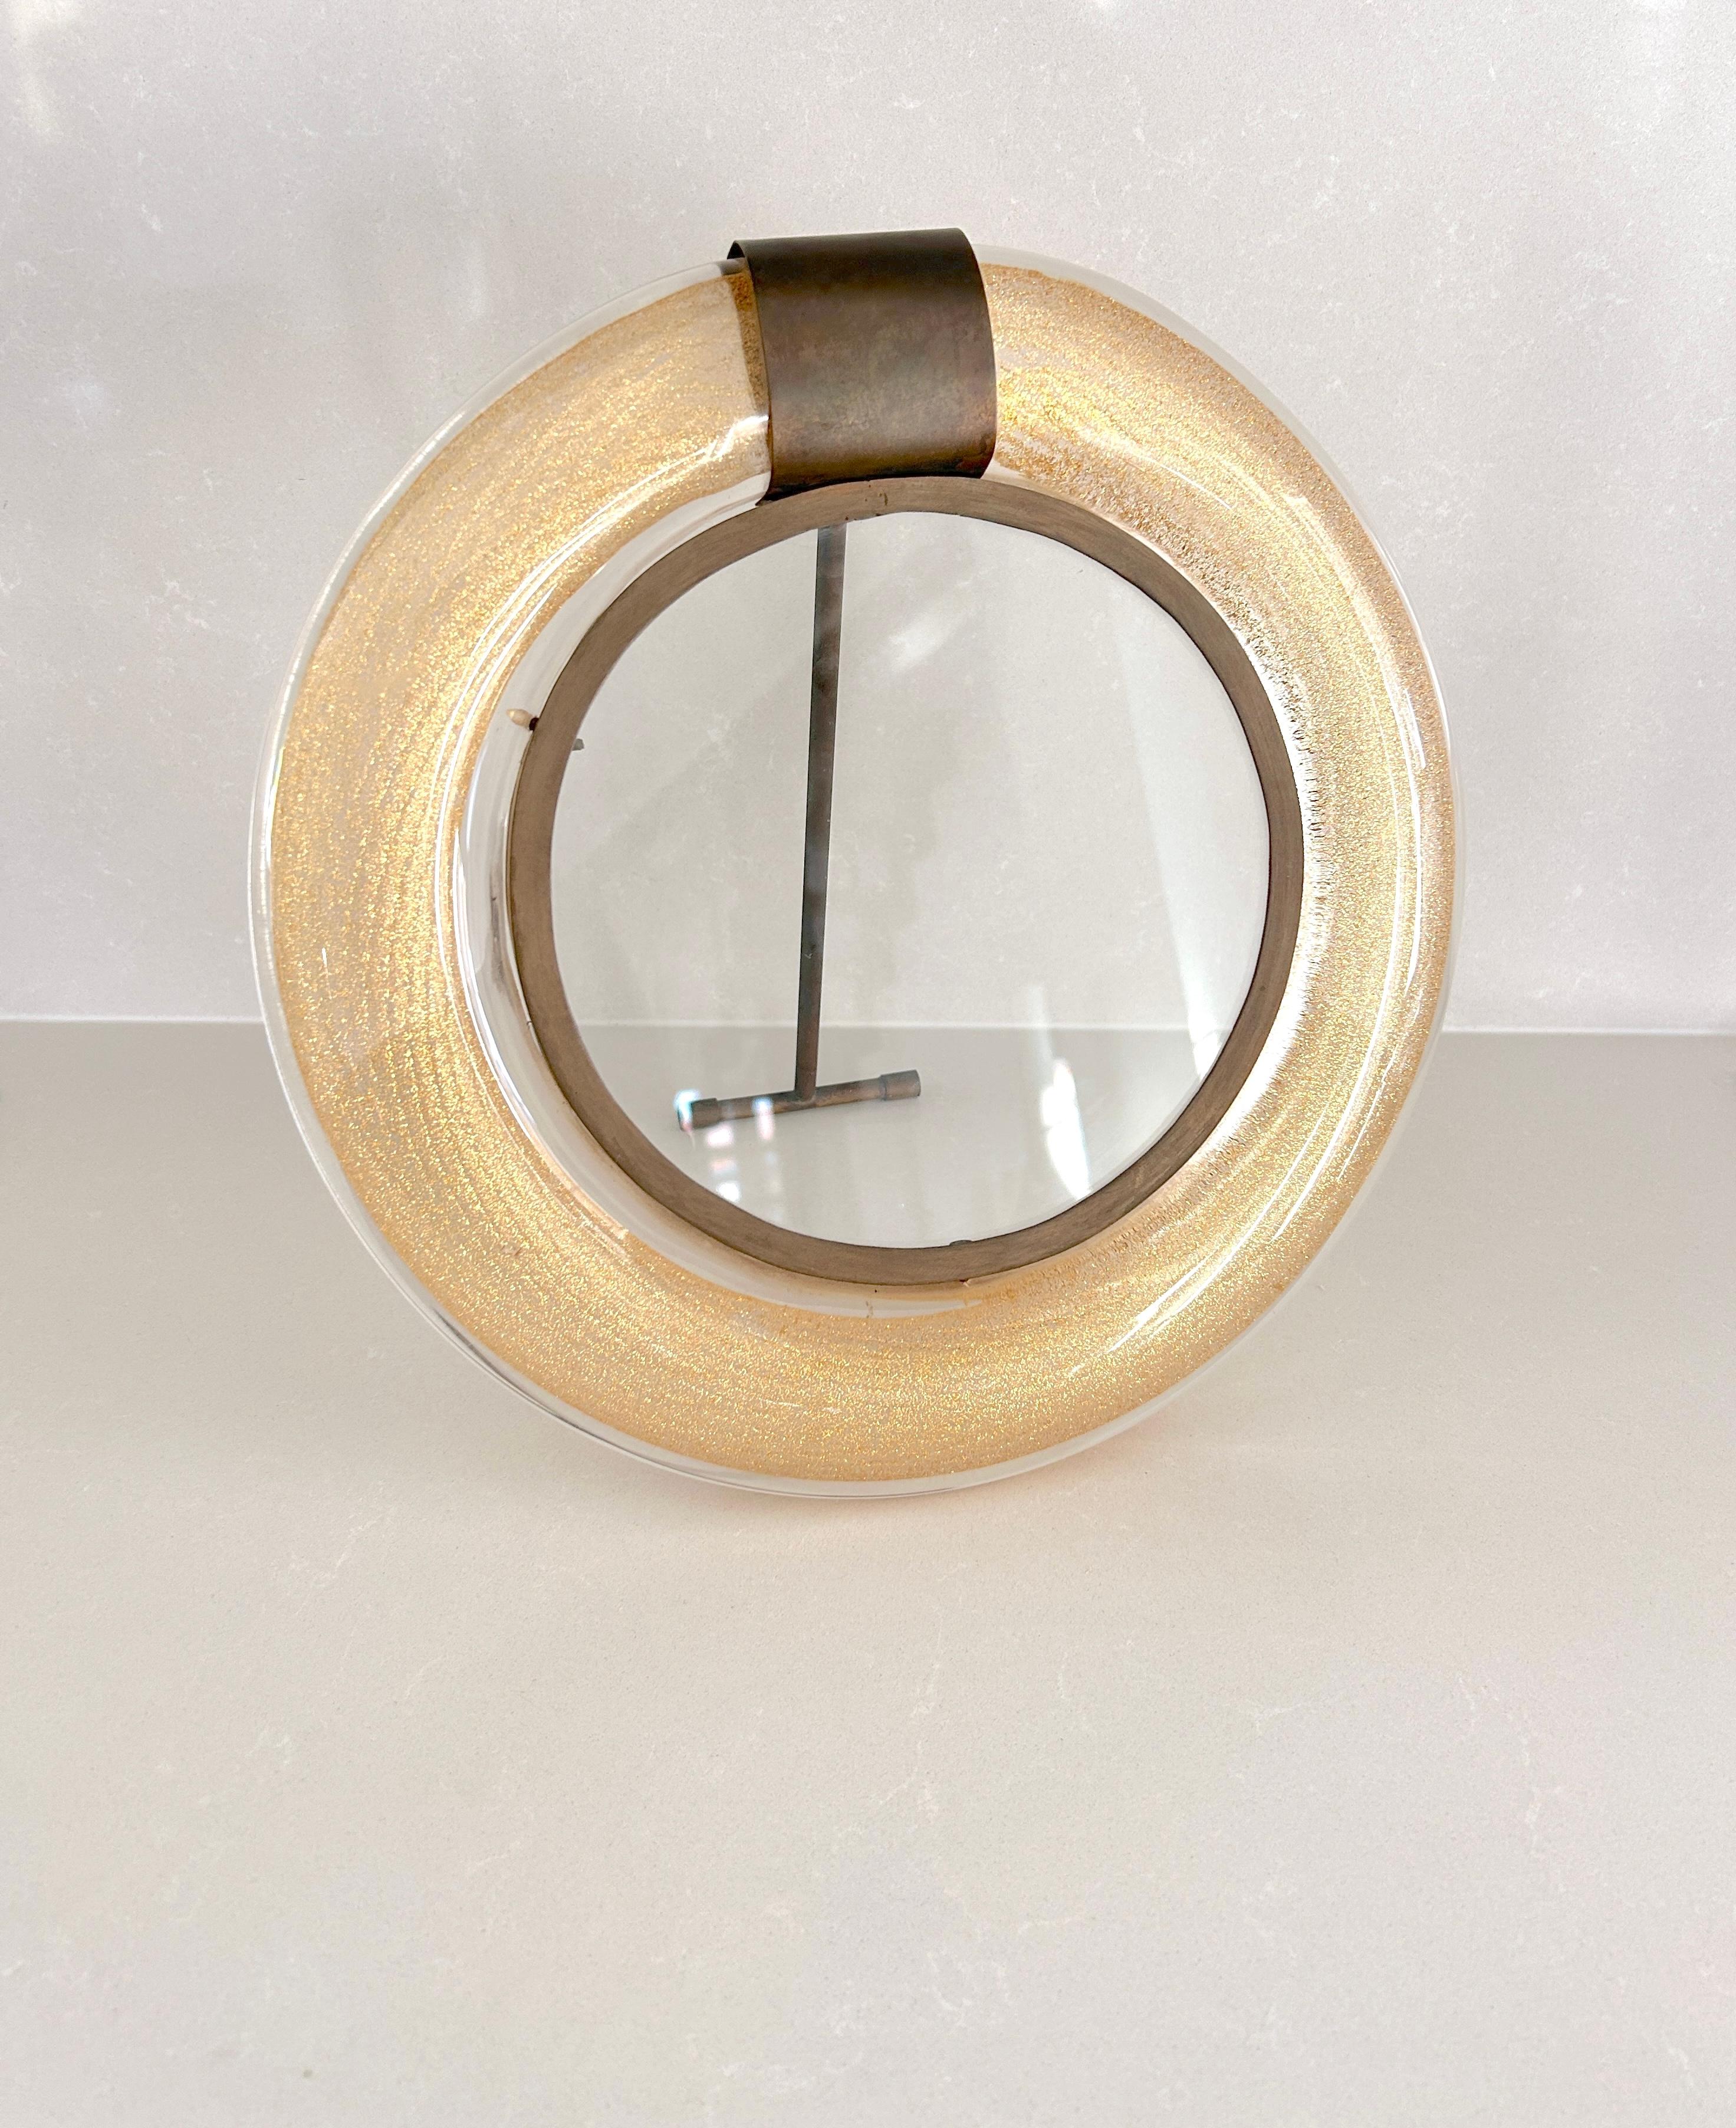 Beautiful and precious Murano glass frame, Seguso, 1950s
Glass frame with gold leaf inserts.
Brass frame and details